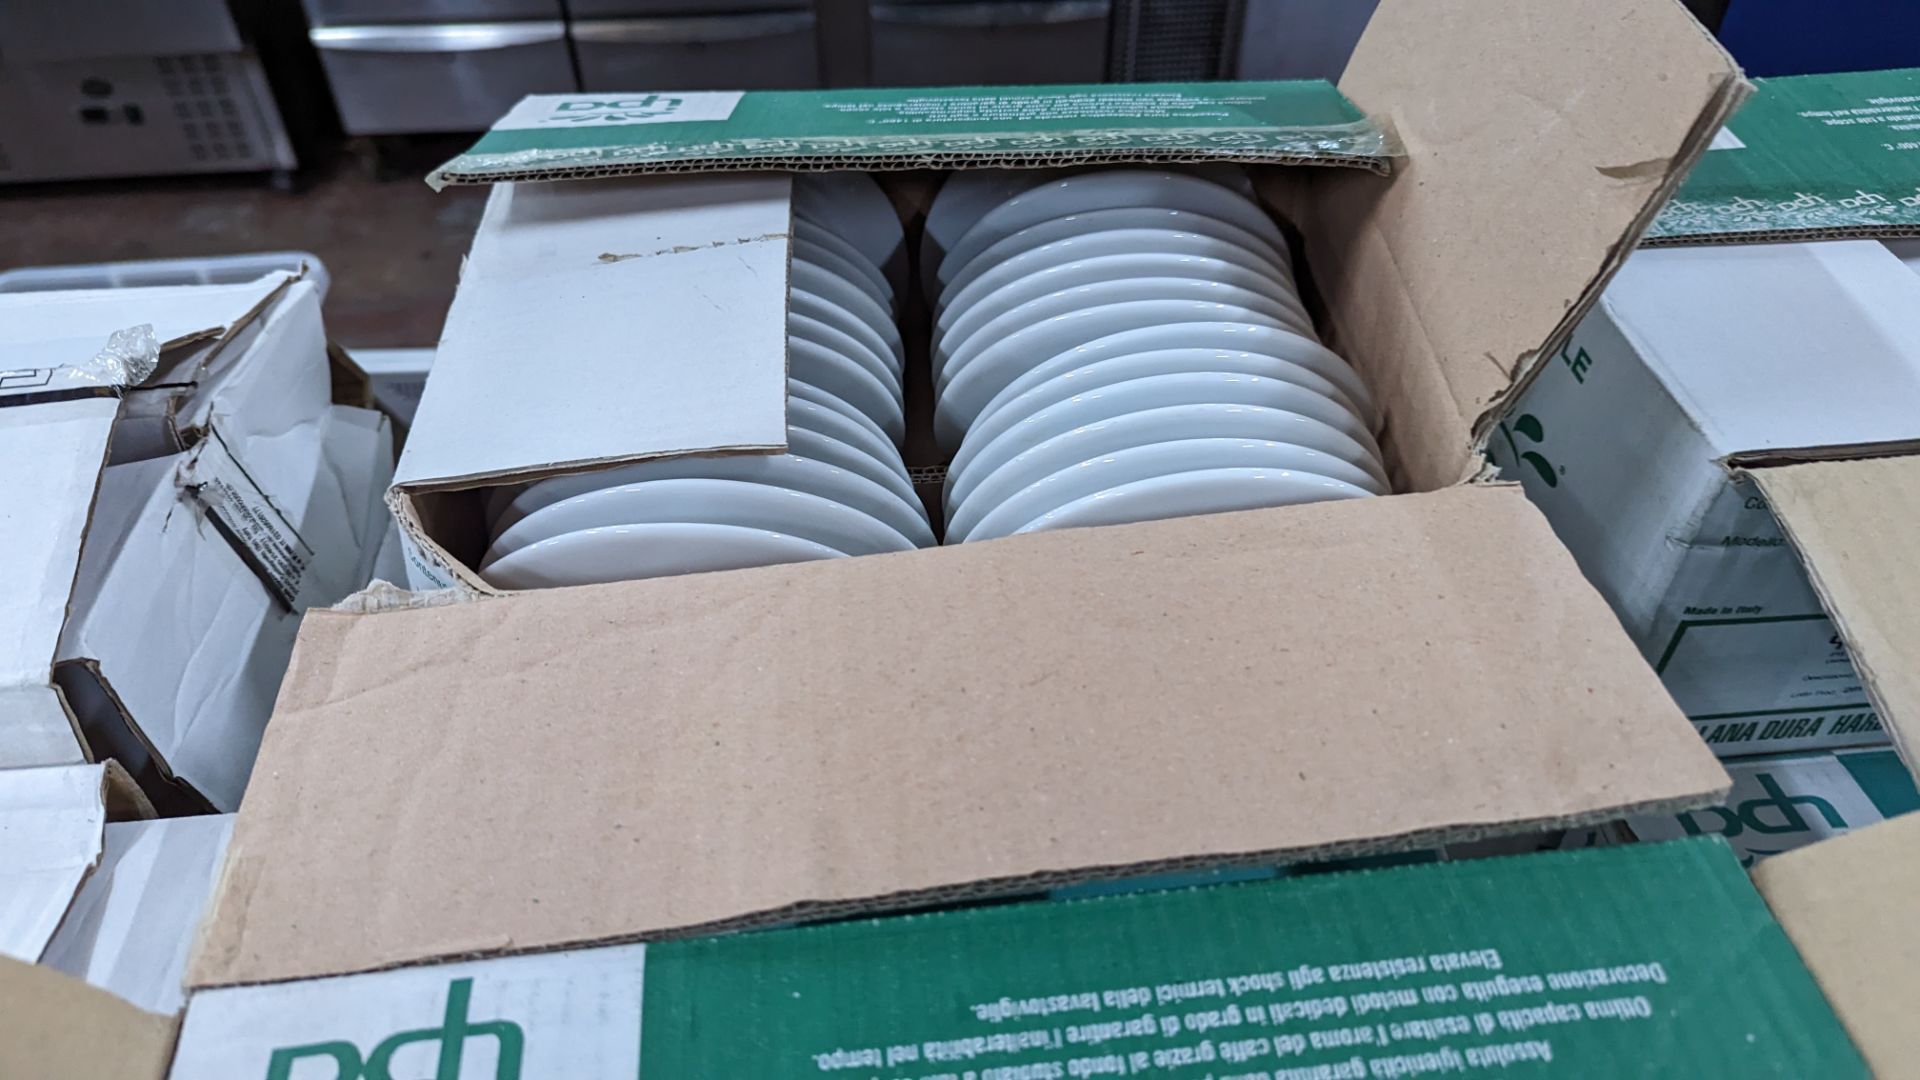 6 boxes of coffee cups and saucers - each box typically contains 6 cups and 6 saucers, however the s - Image 7 of 10